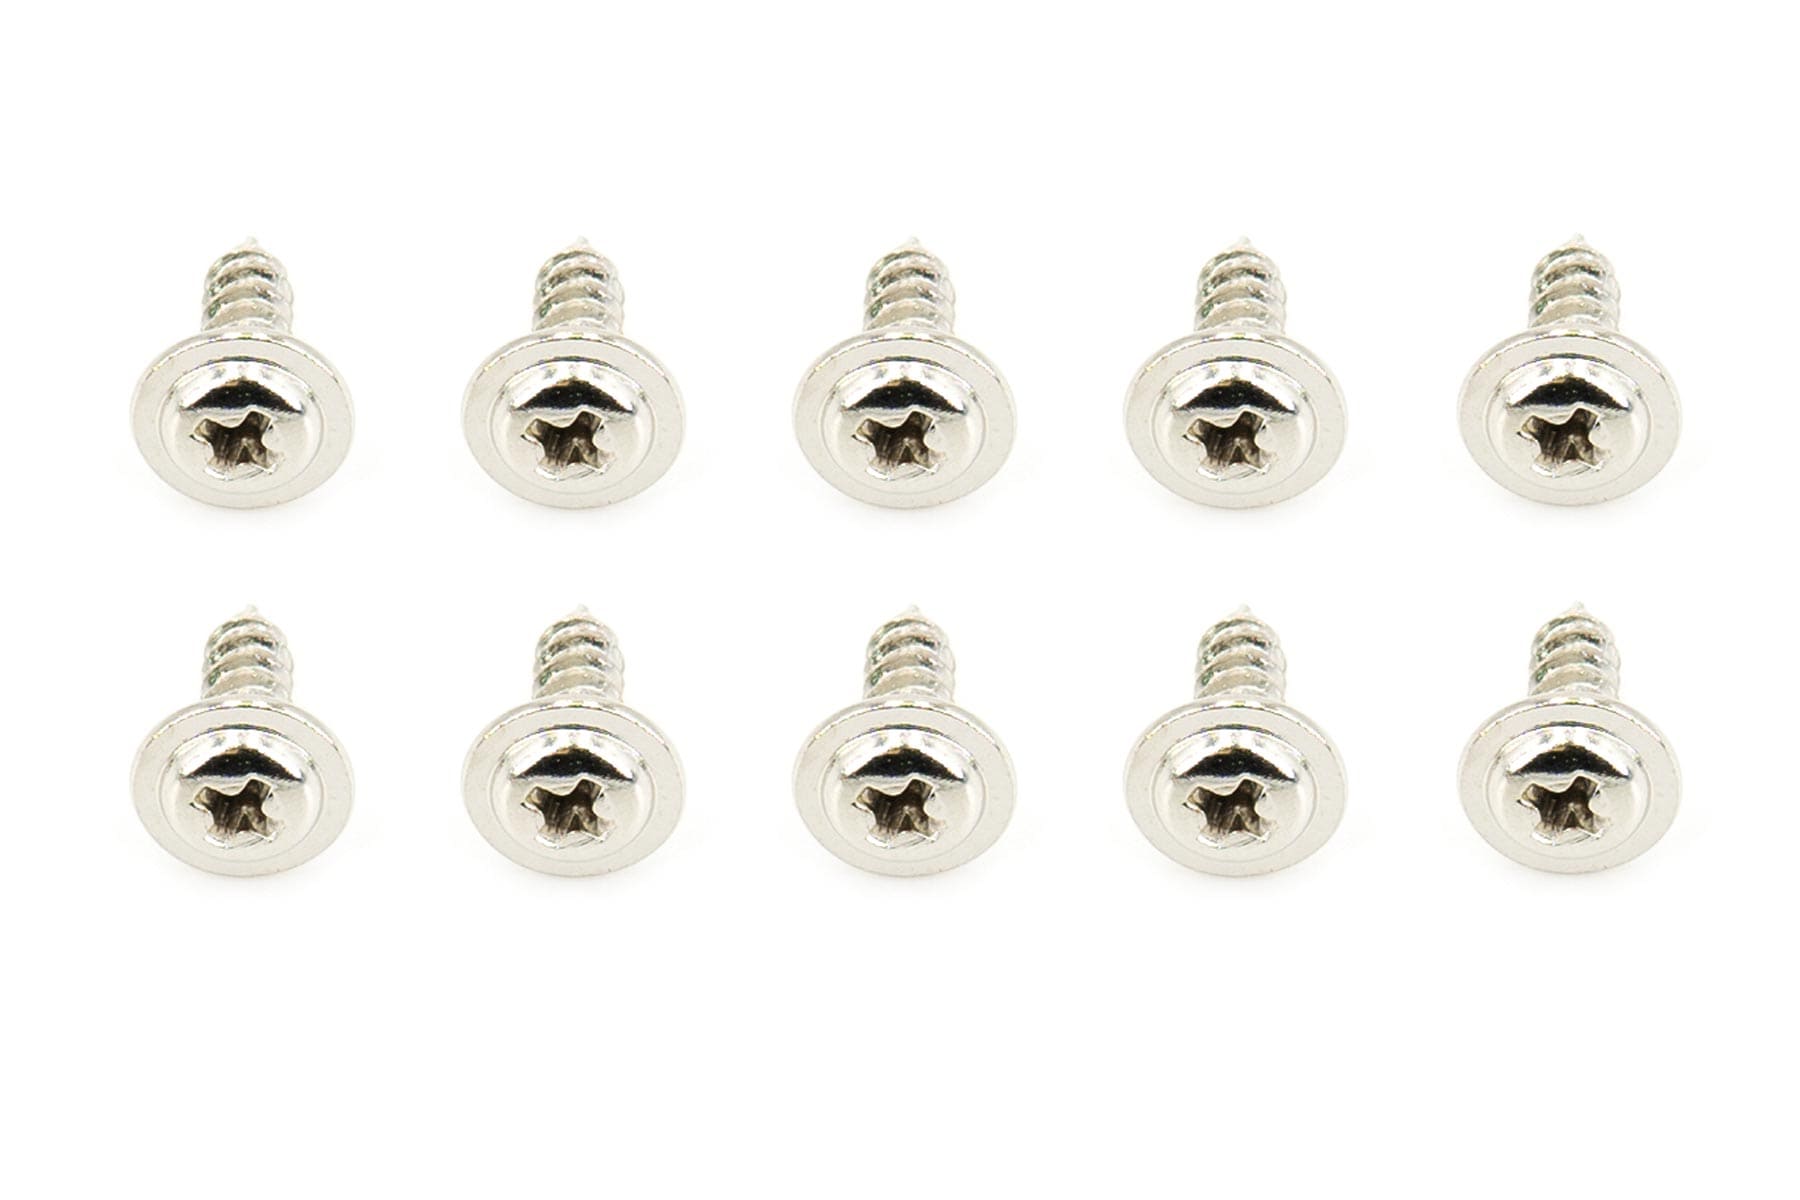 BenchCraft 2.5mm x 8mm Self-Tapping Washer Head Screws (10 Pack)